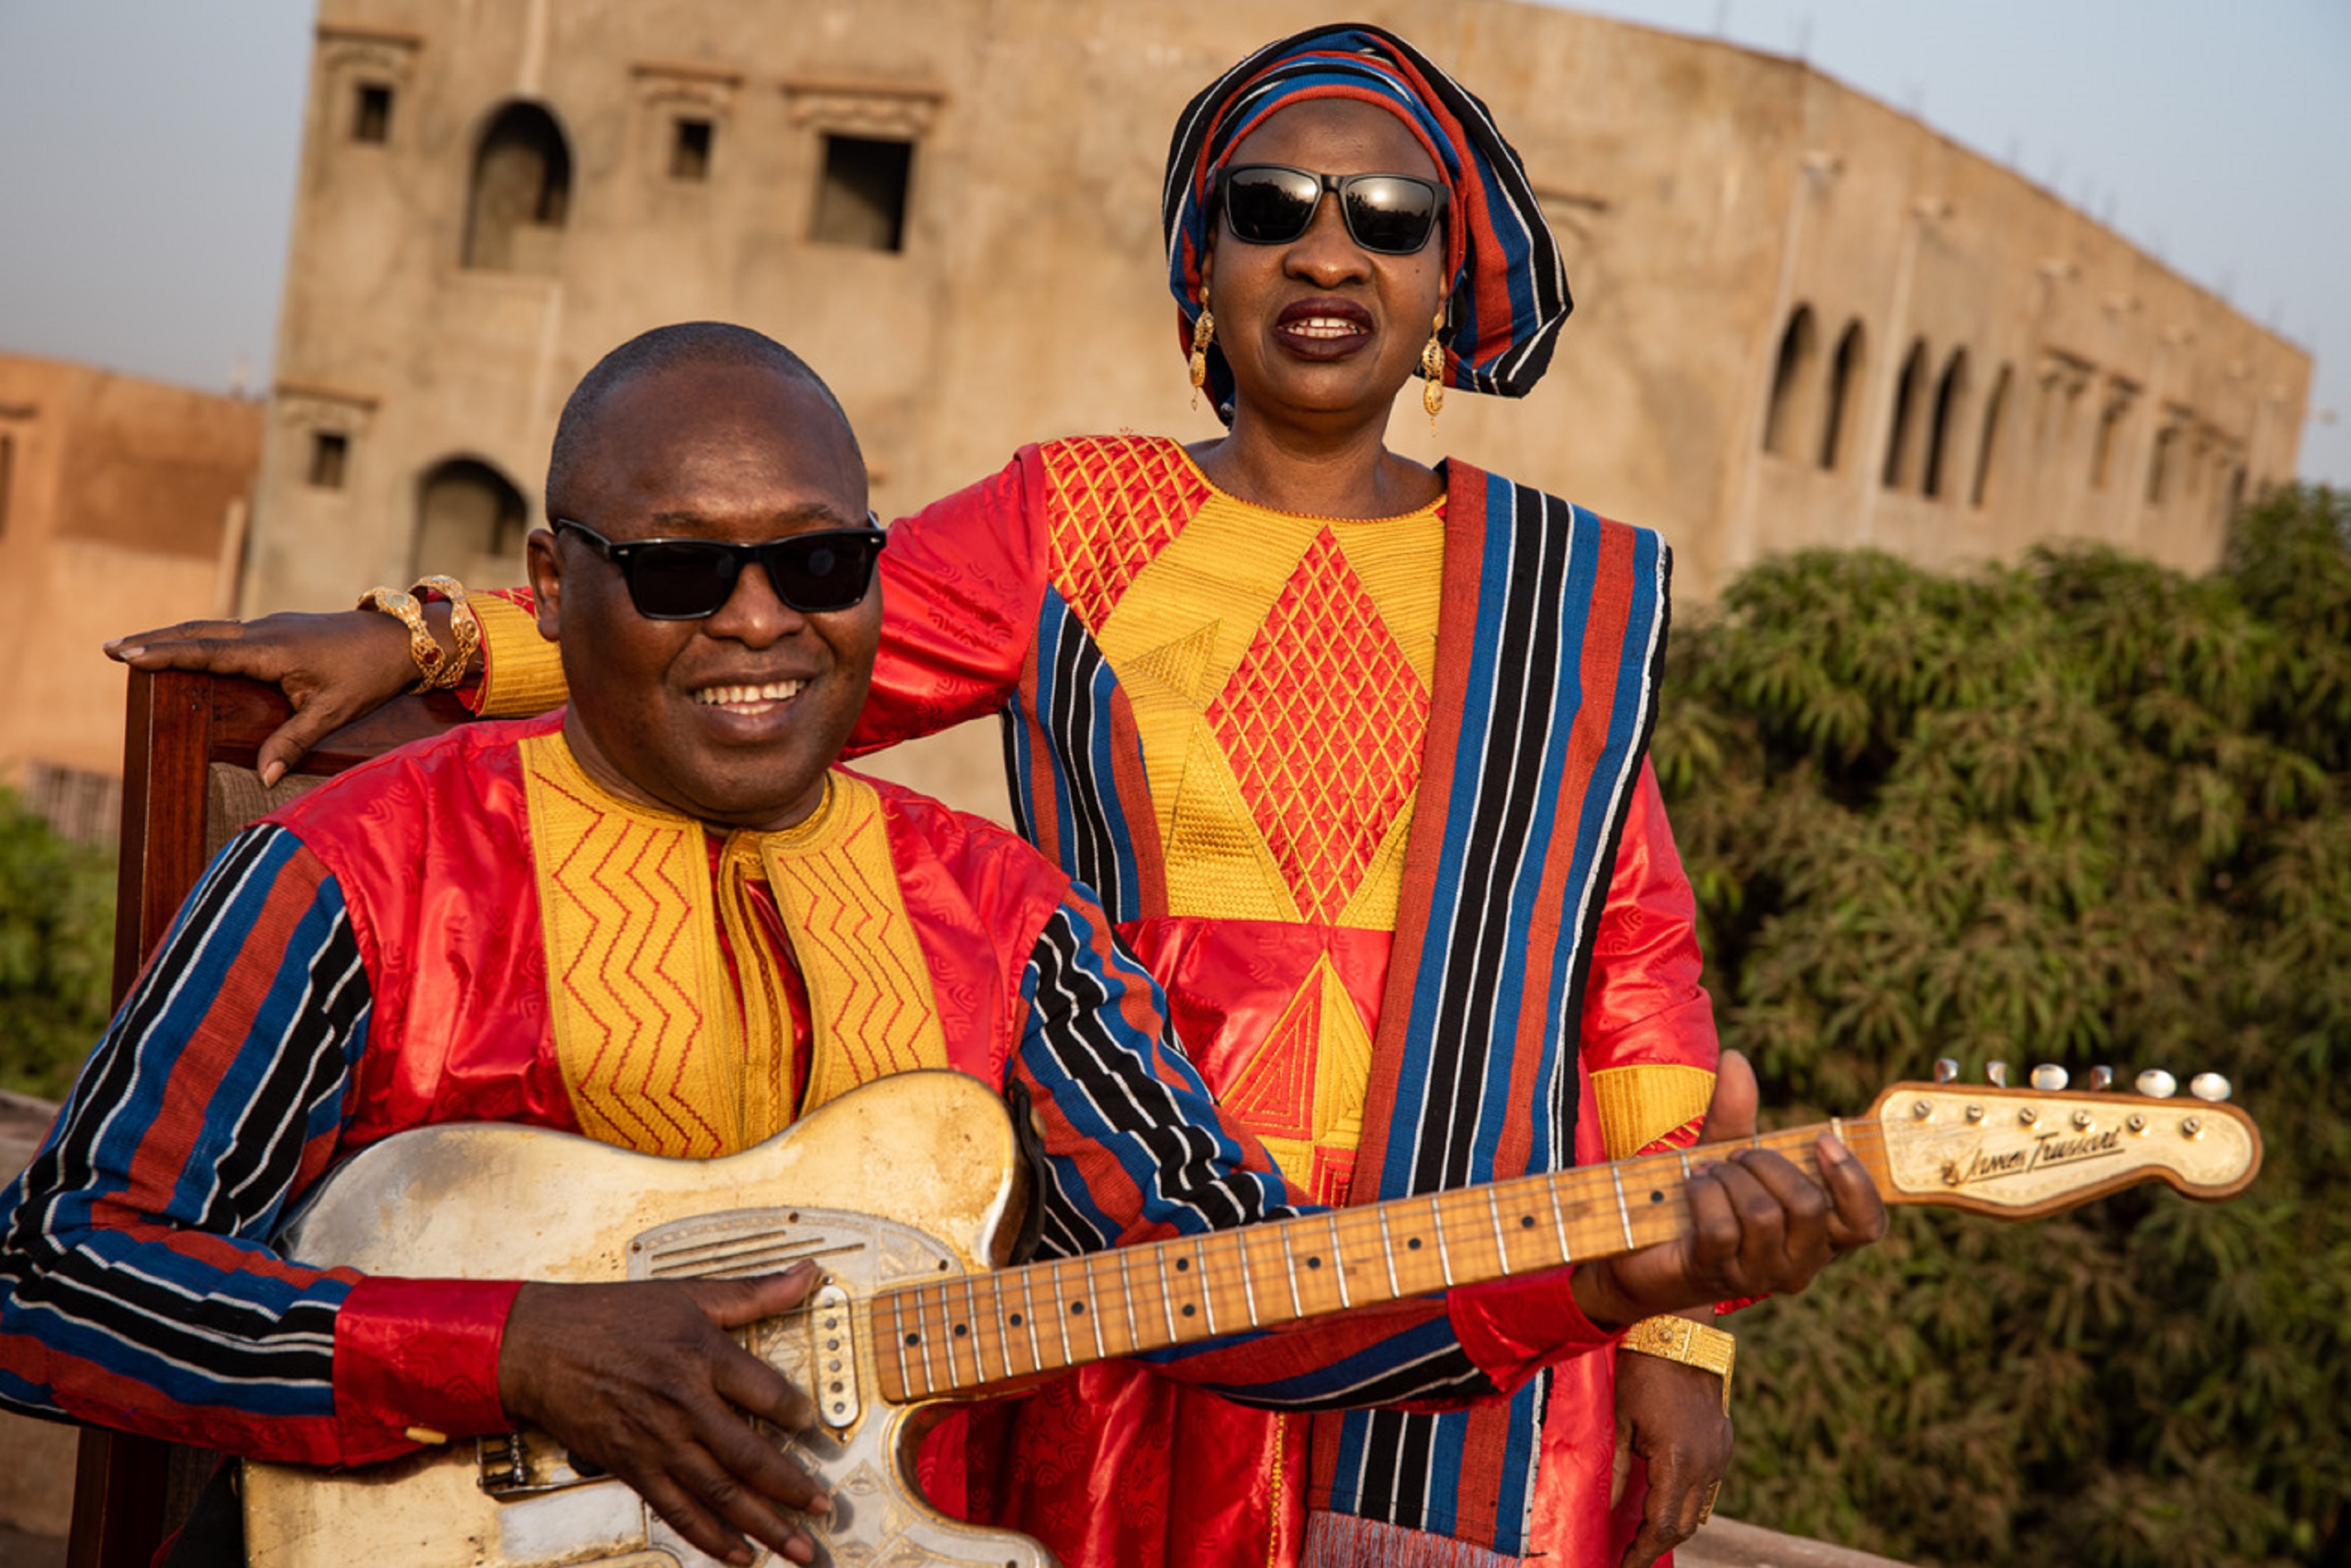 Global Icons of African Music Amadou & Mariam - U.S. Tour In Support of New Live Album "Eclipse"